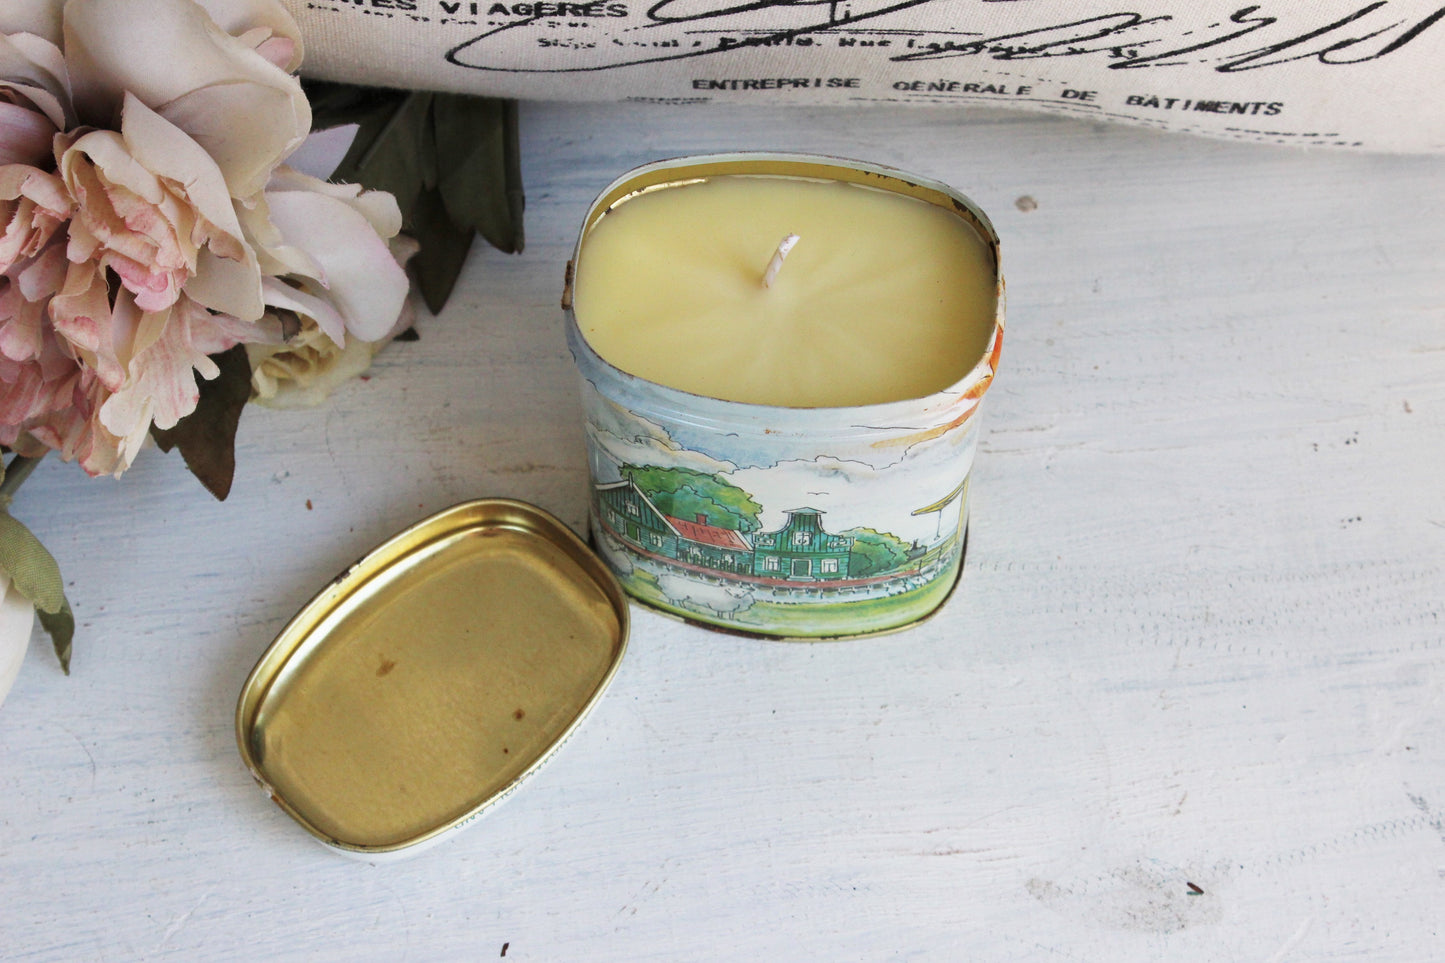 Handmade Soy Wax Candle in a Vintage Tin Container